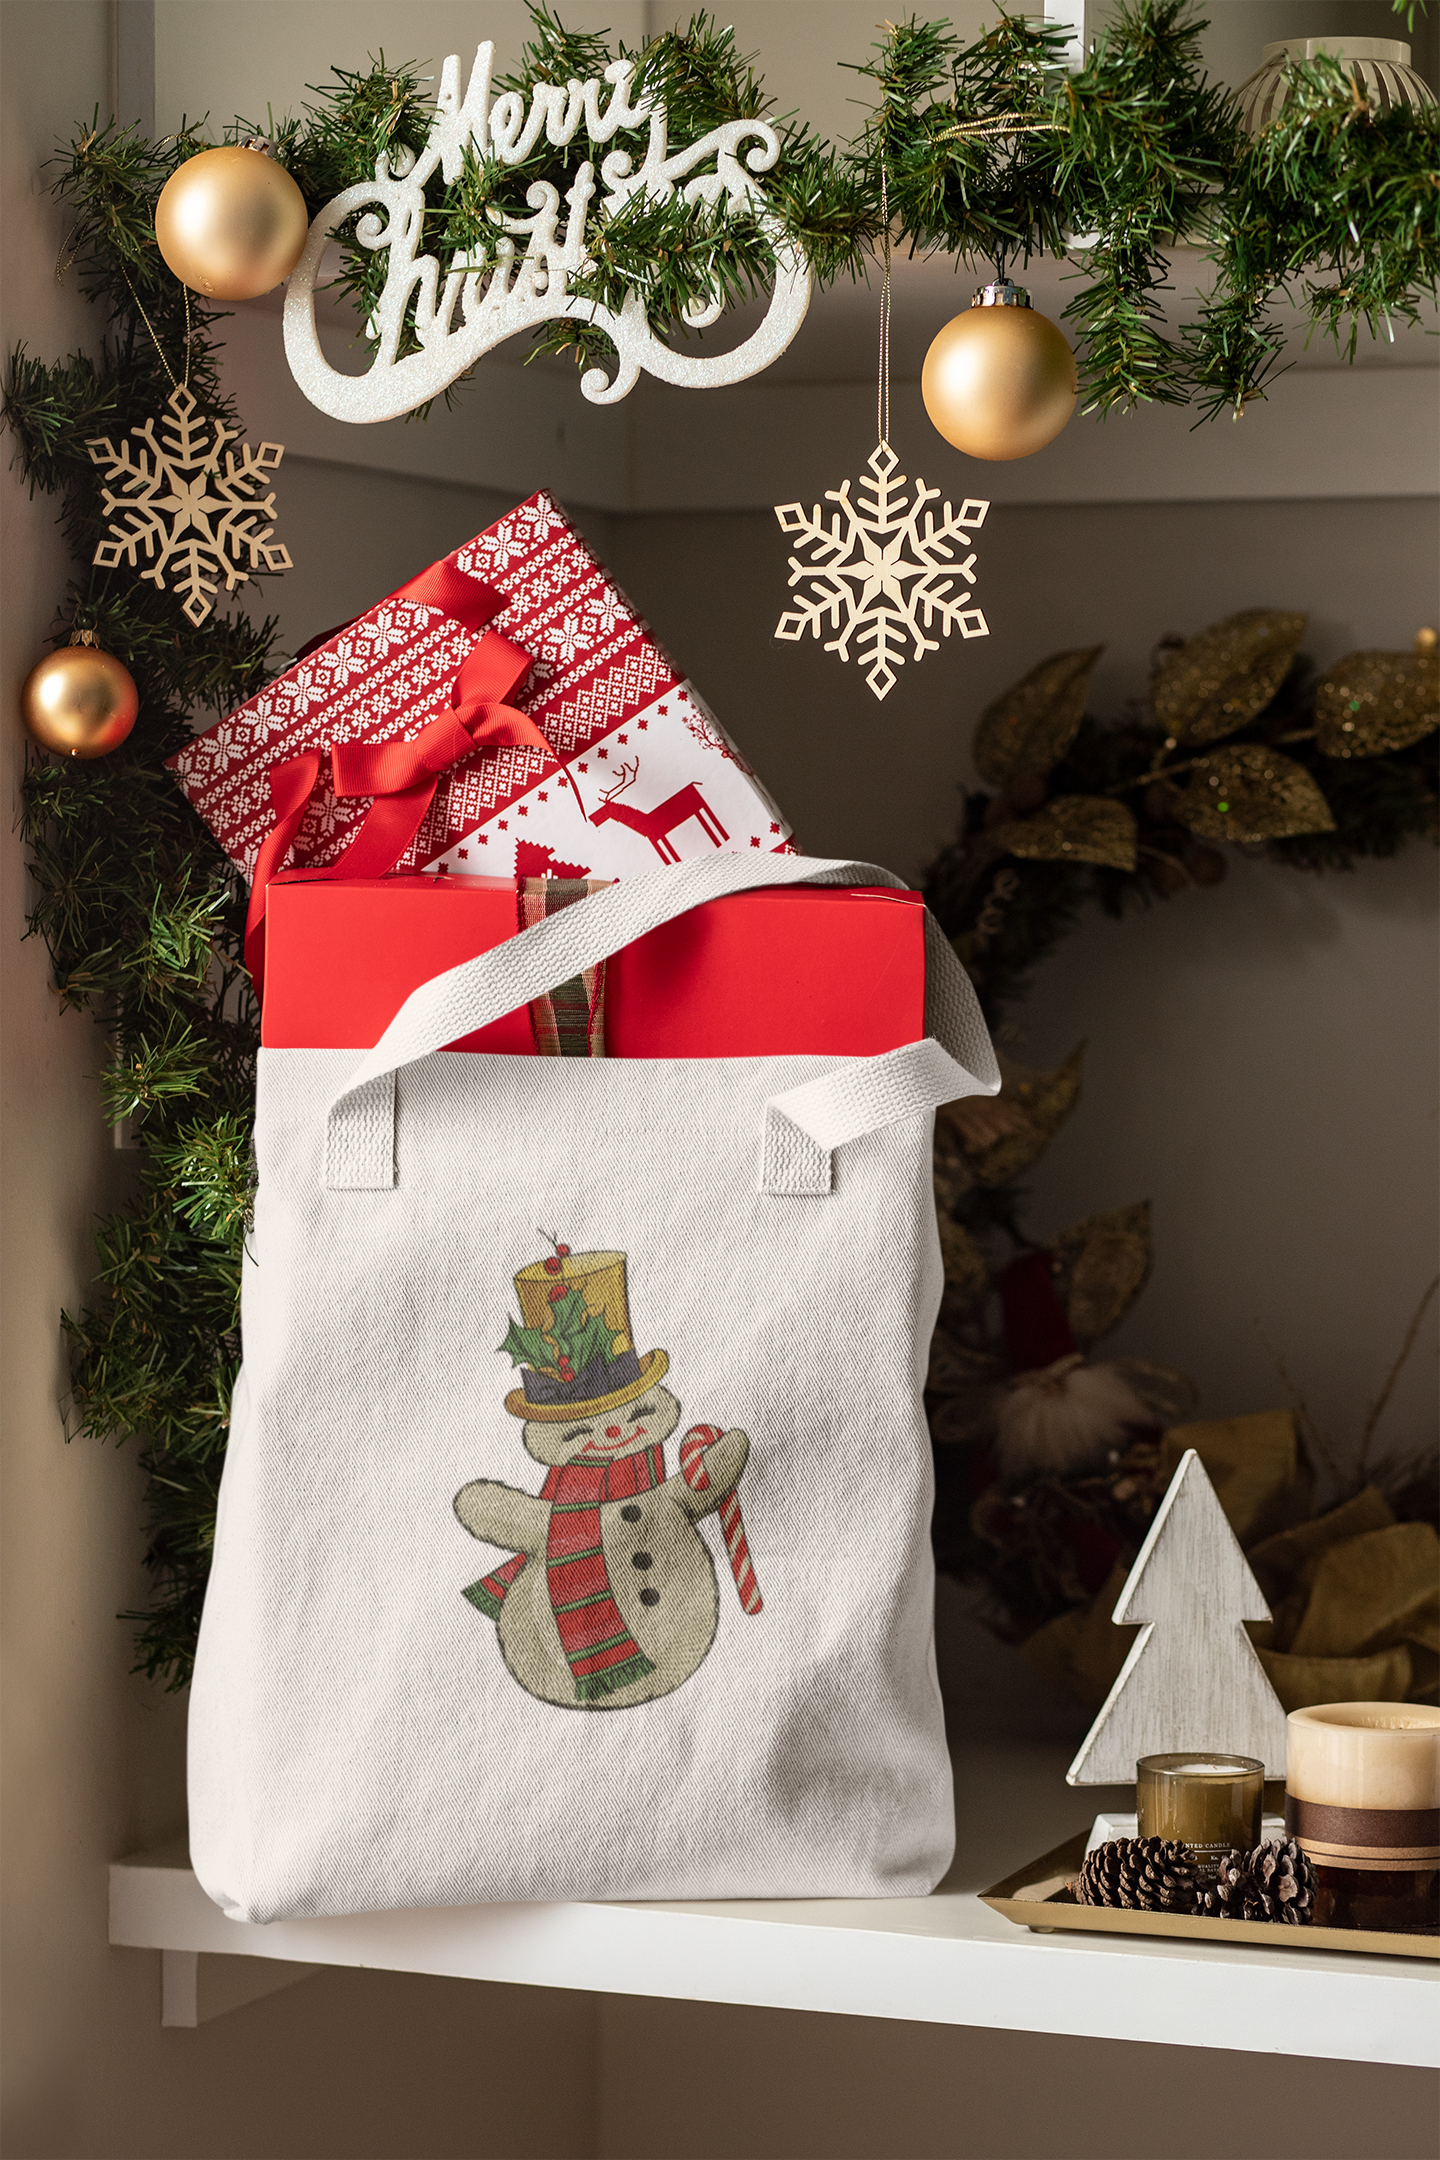 Embroidered bag with Funny snowman design